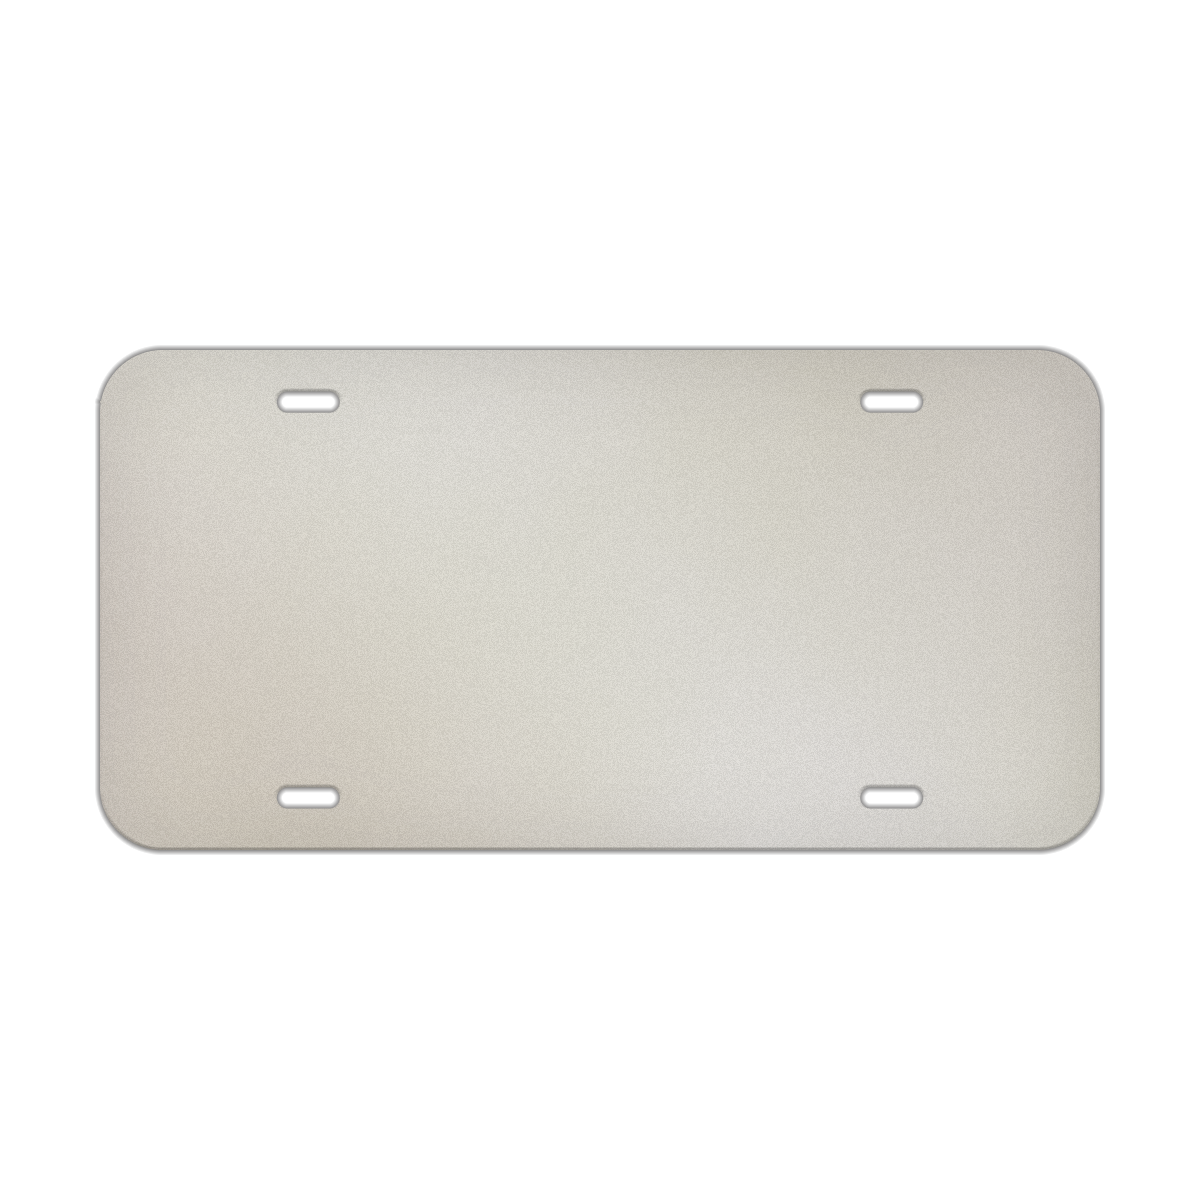 Aluminum Mirrored License Plate Blanks - 6 in x 12 in - Gold